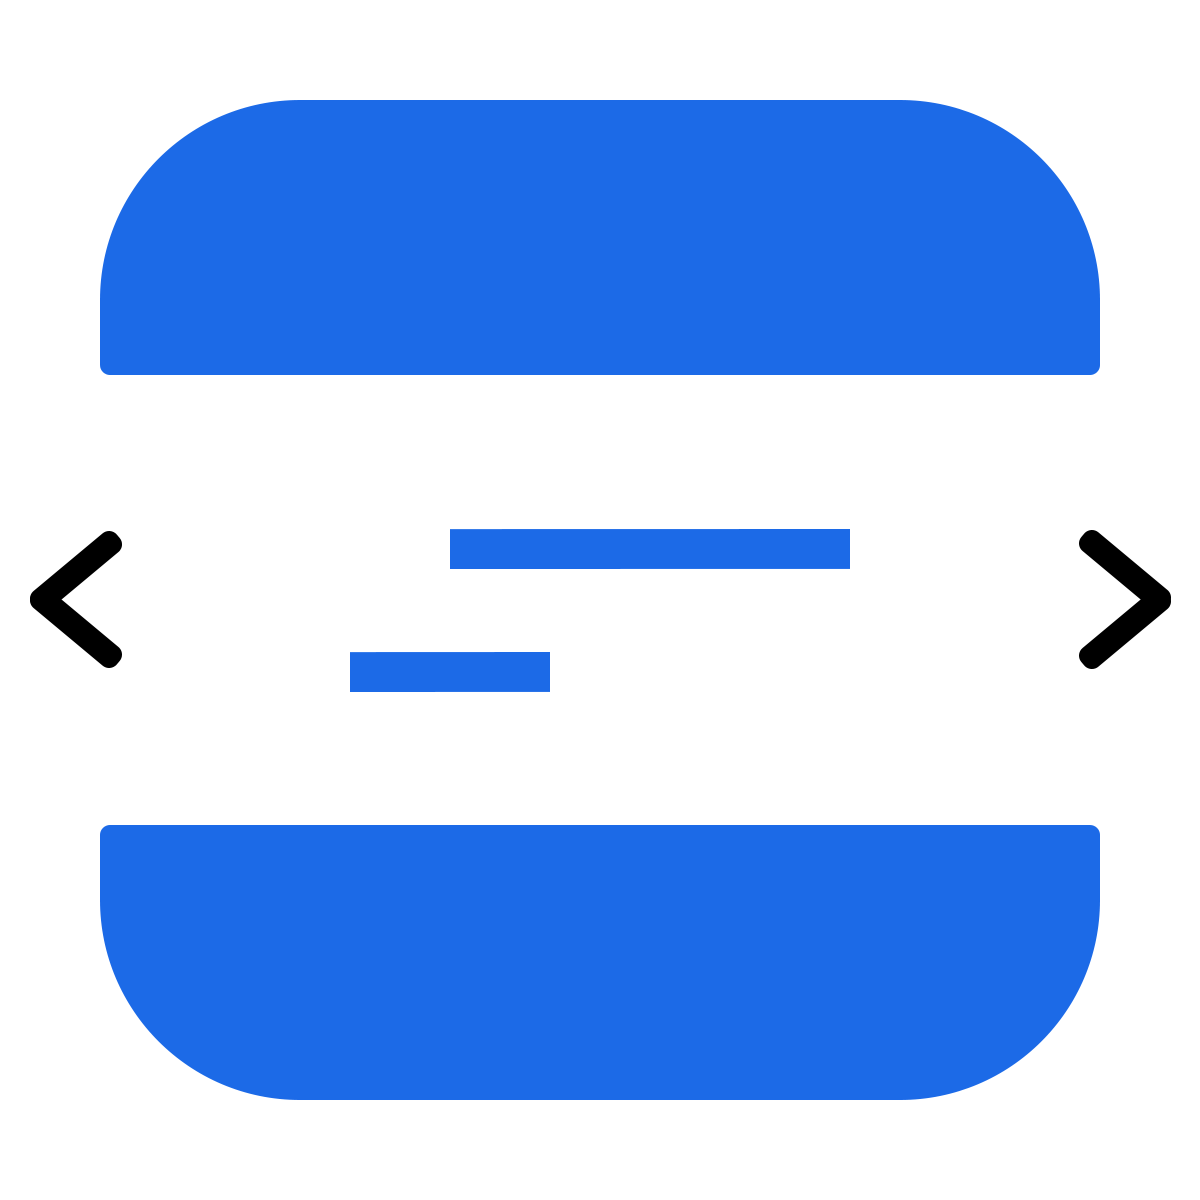 Hire Shopify Experts to integrate Samurai ‑ Sliders app into a Shopify store